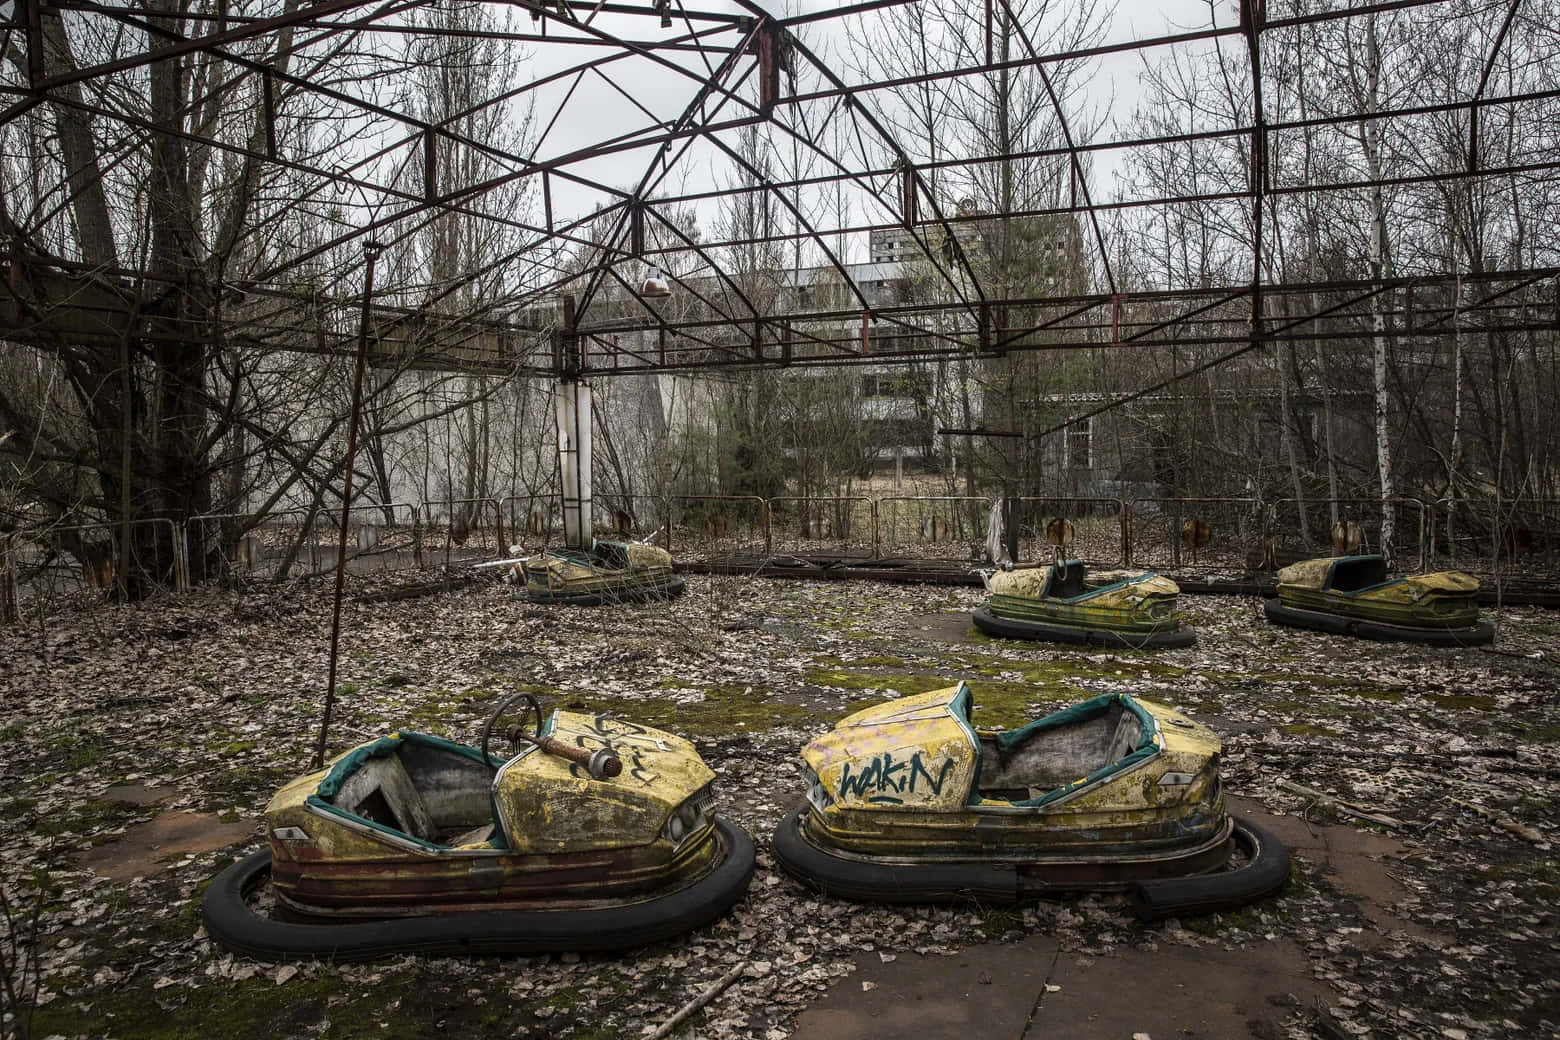 Tour of the Chernobyl Exclusion Zone